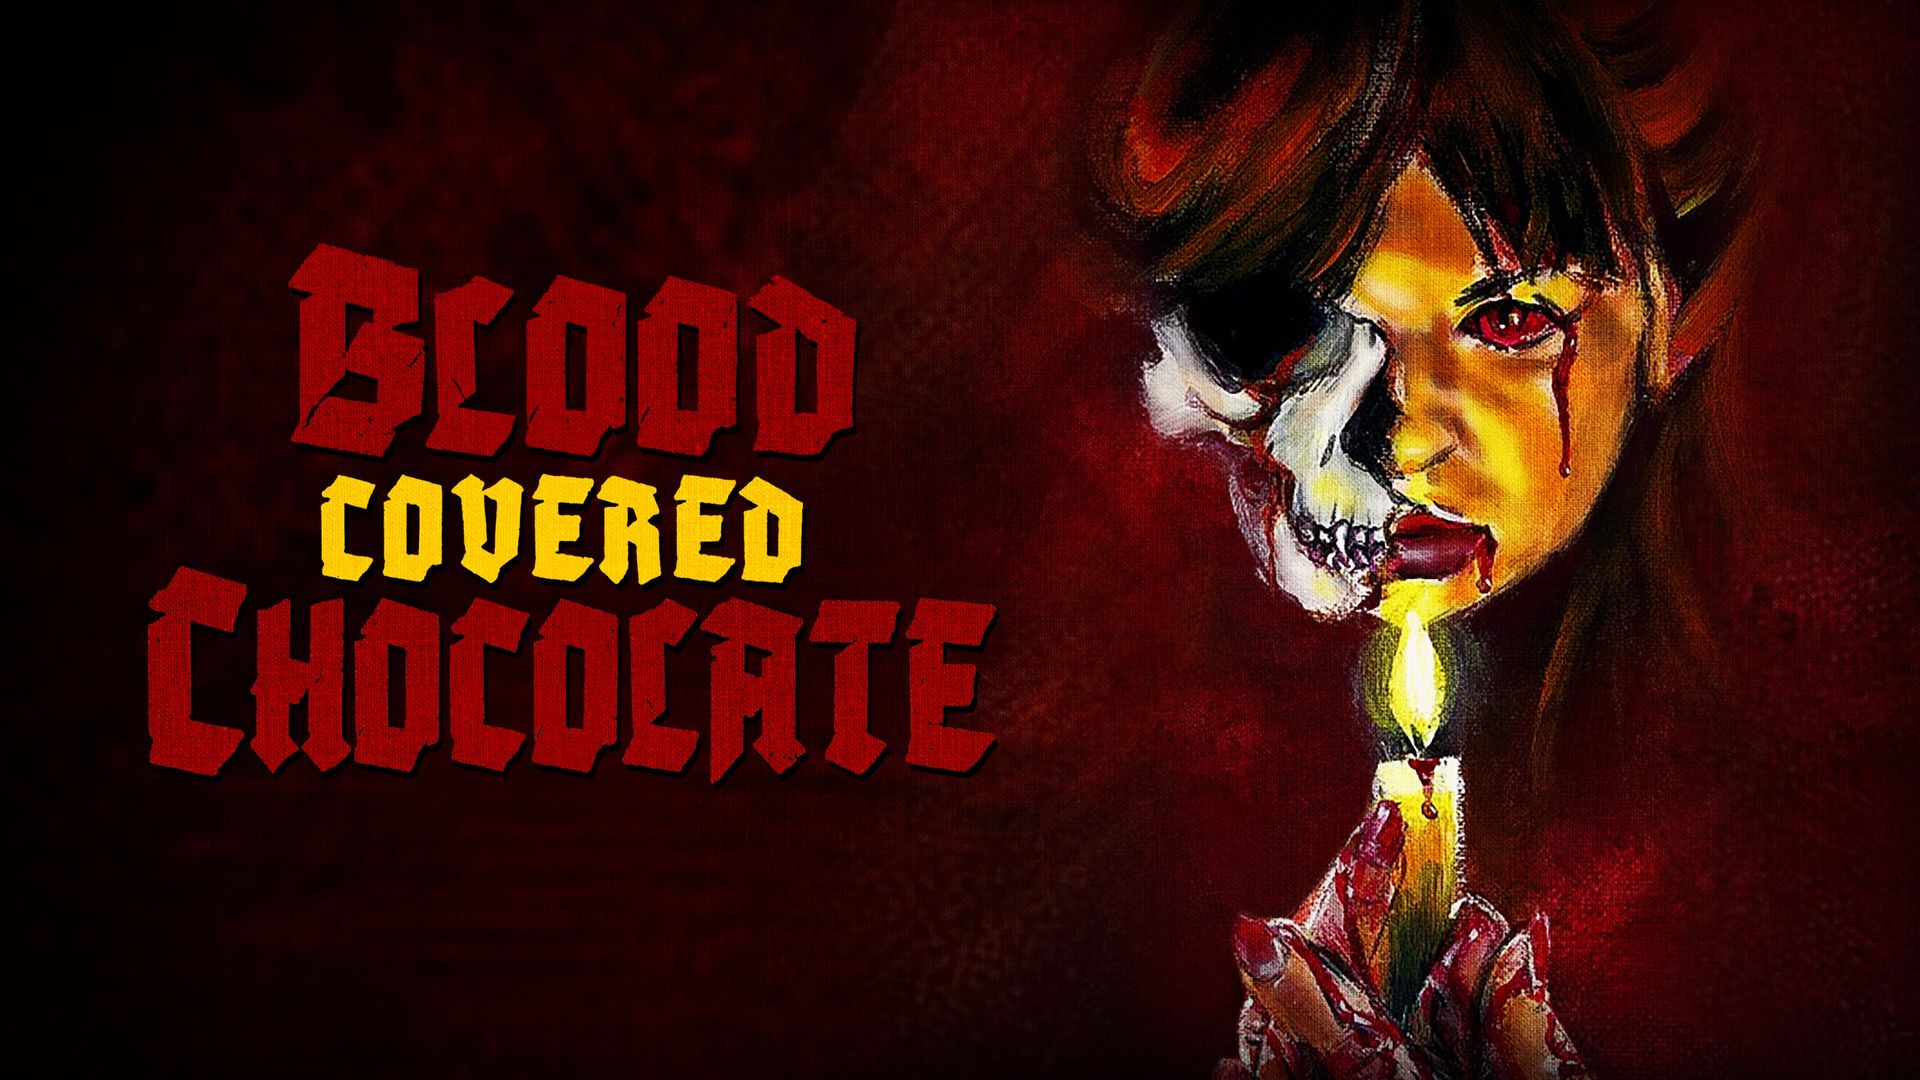 Blood Covered Chocolate background